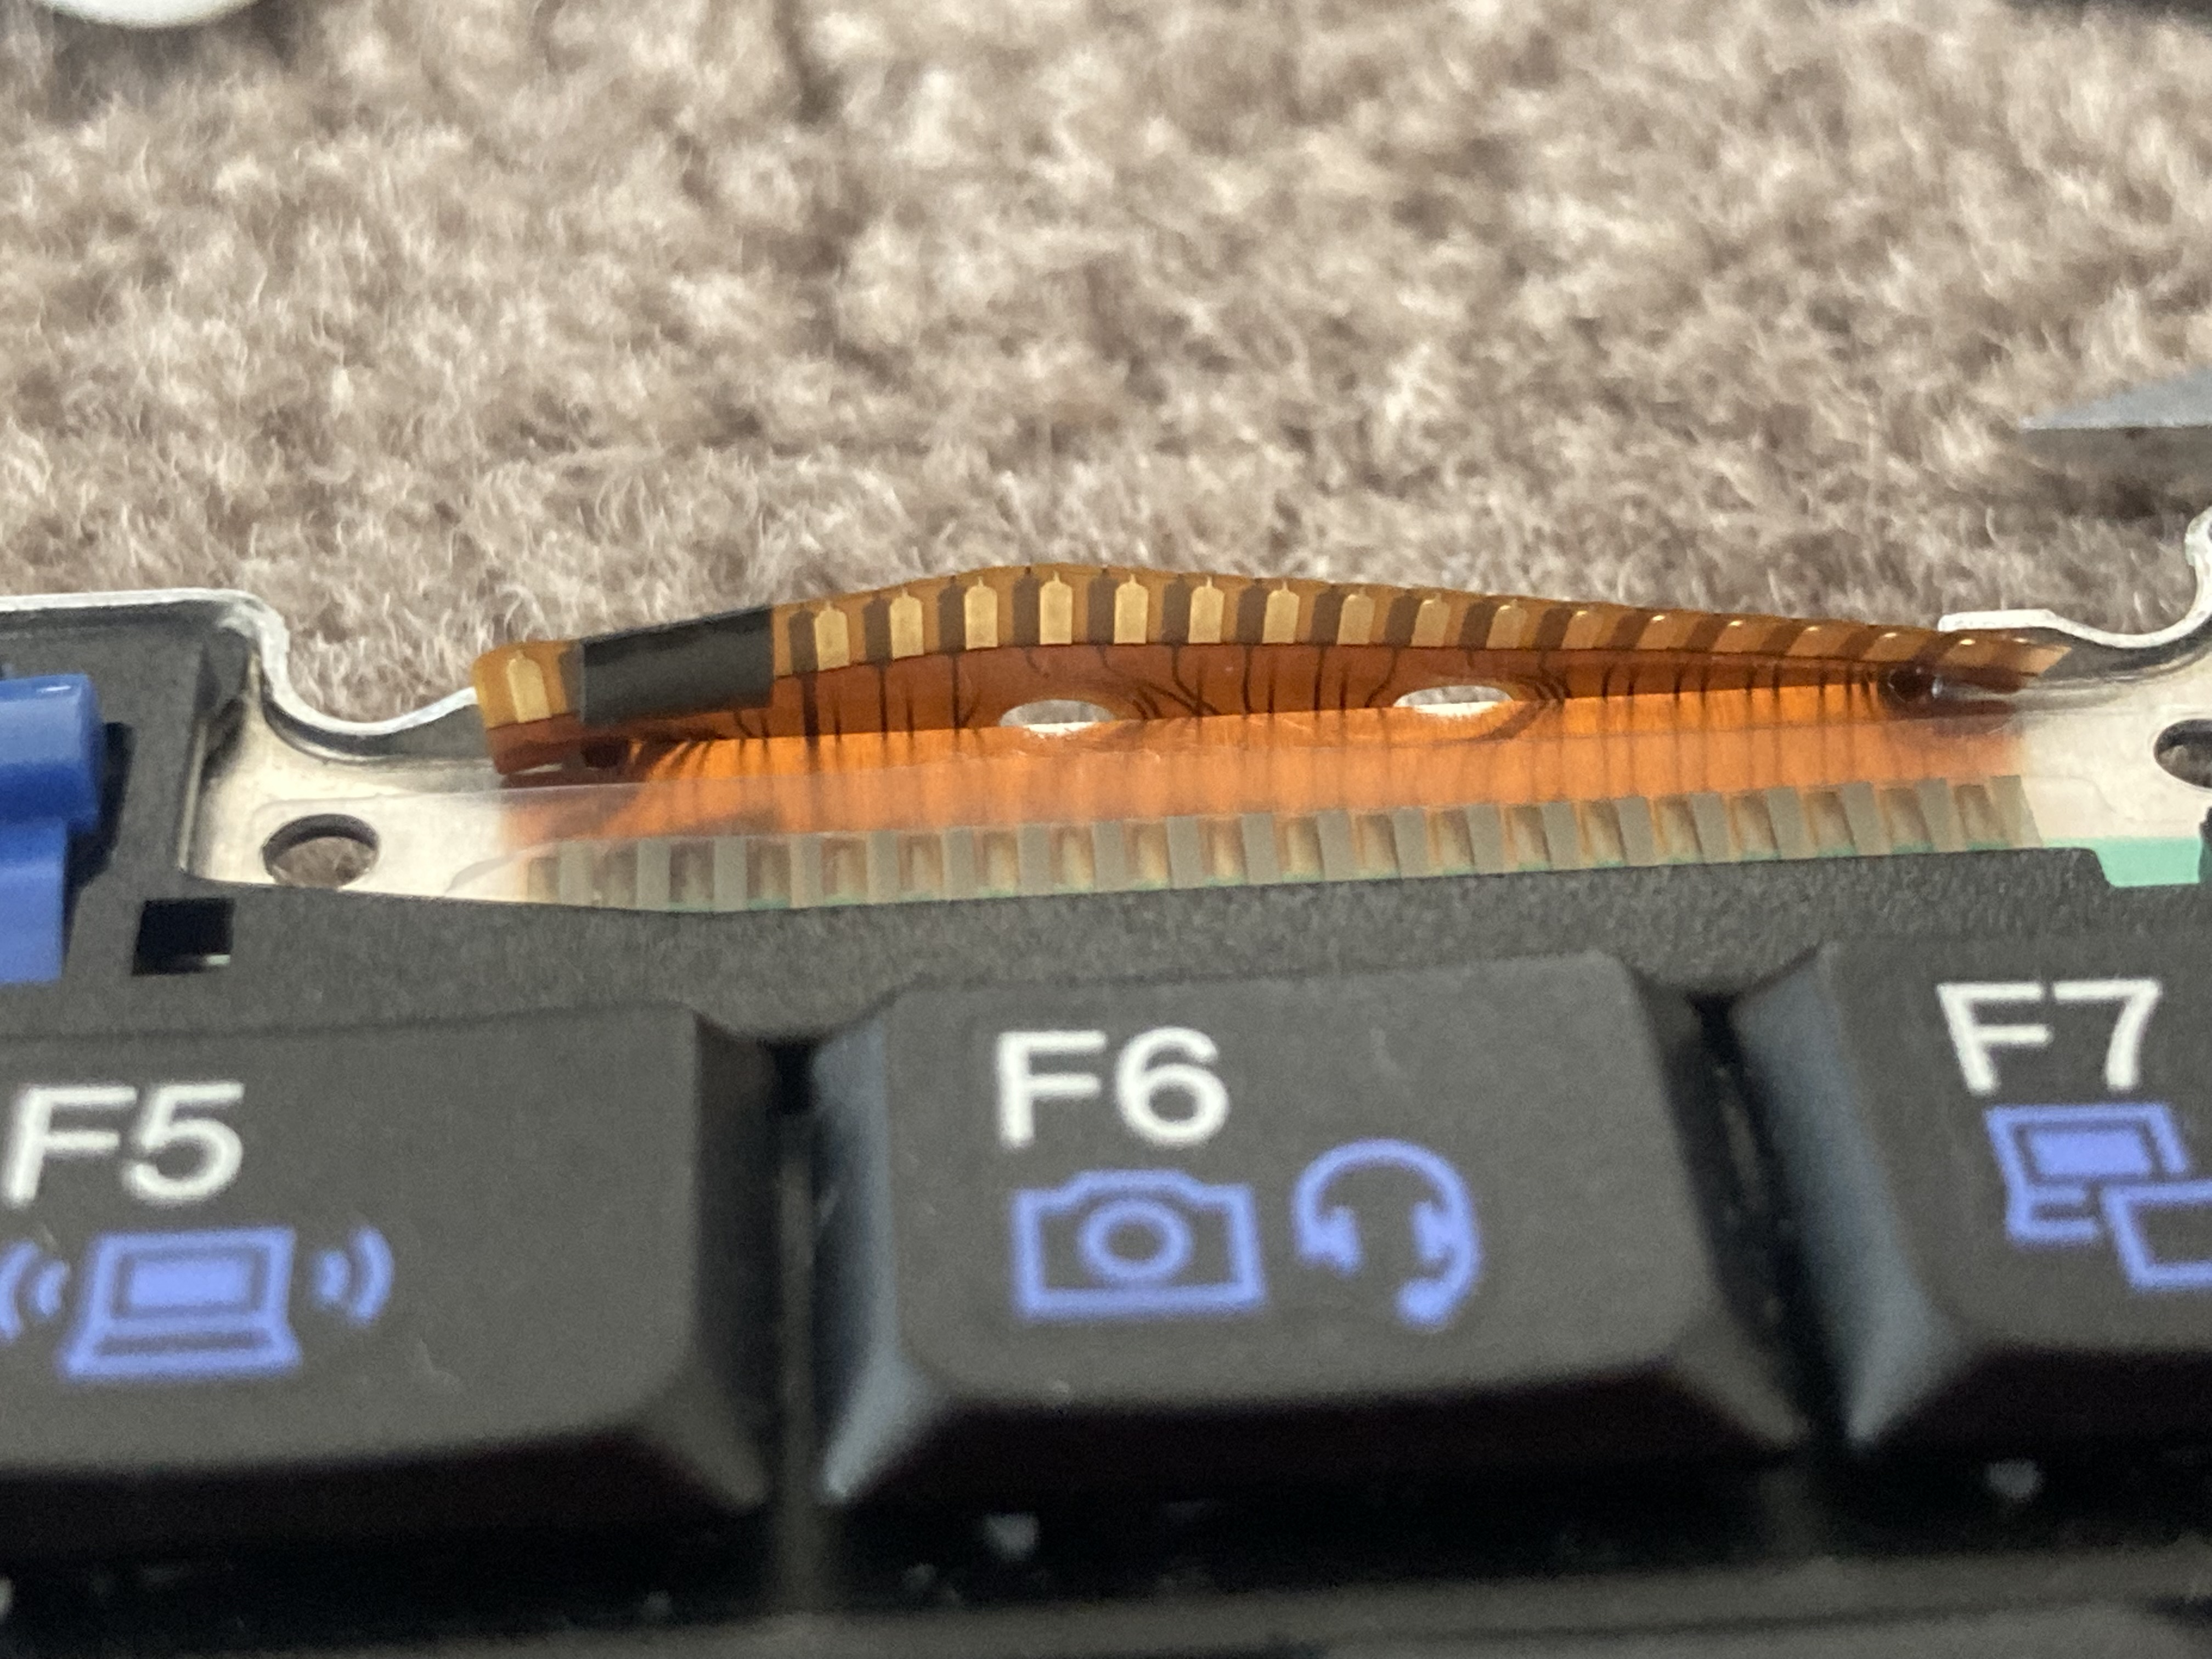 The keyboard ribbon cable with
electrical tape covering some of the contact pads